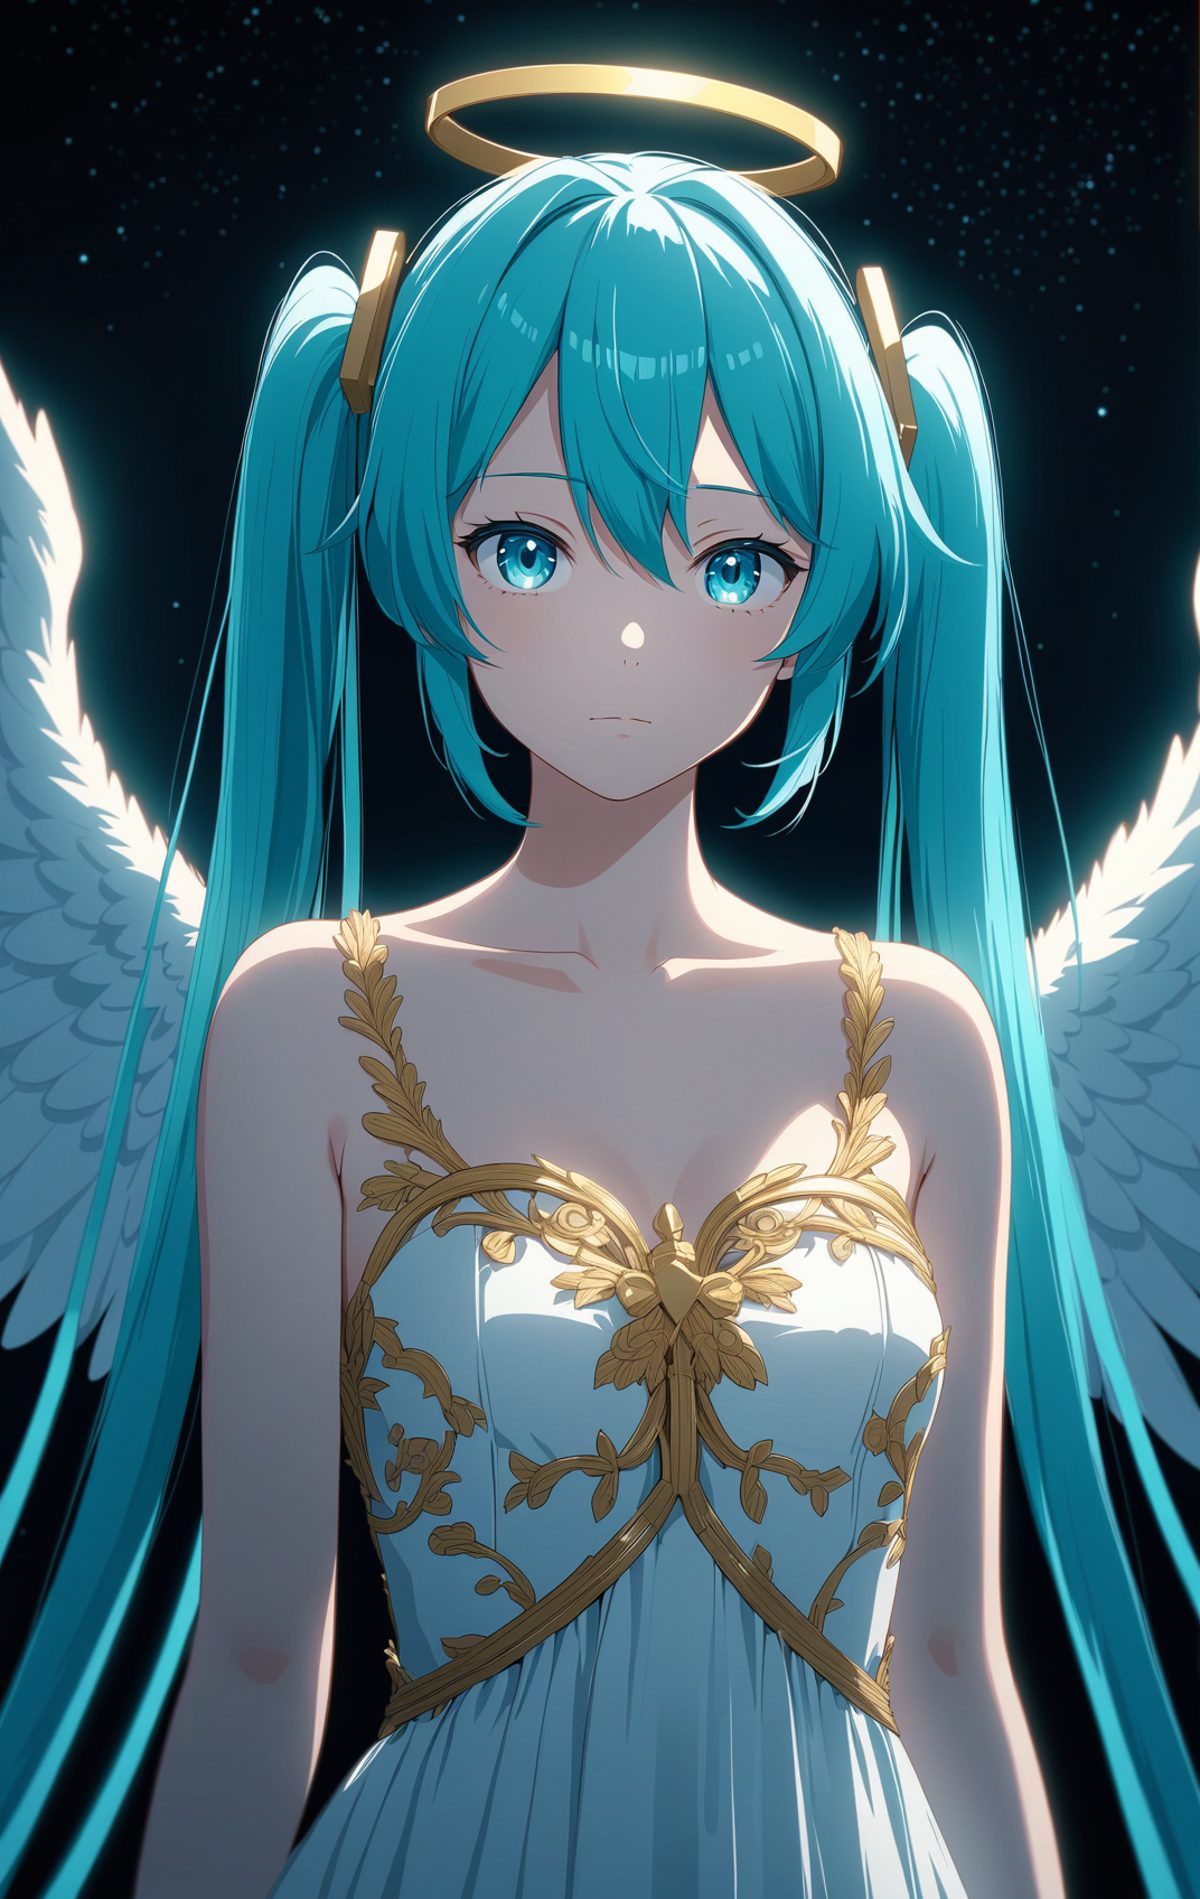 Anime girl with blue eyes wearing a white dress and blue wings.